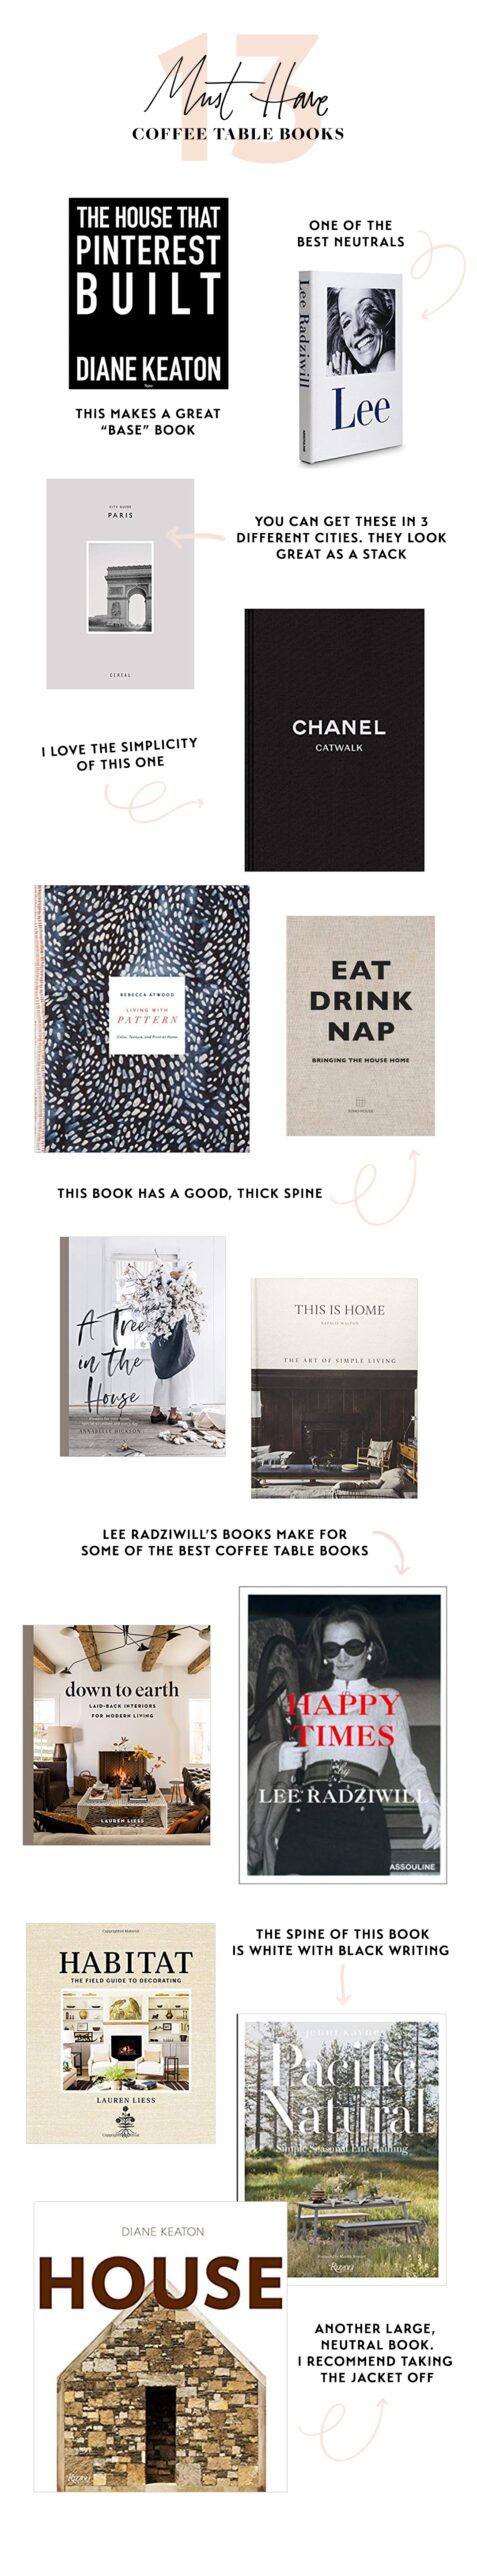 13 of the Best Coffee Table Books + Tips on how to Style Them